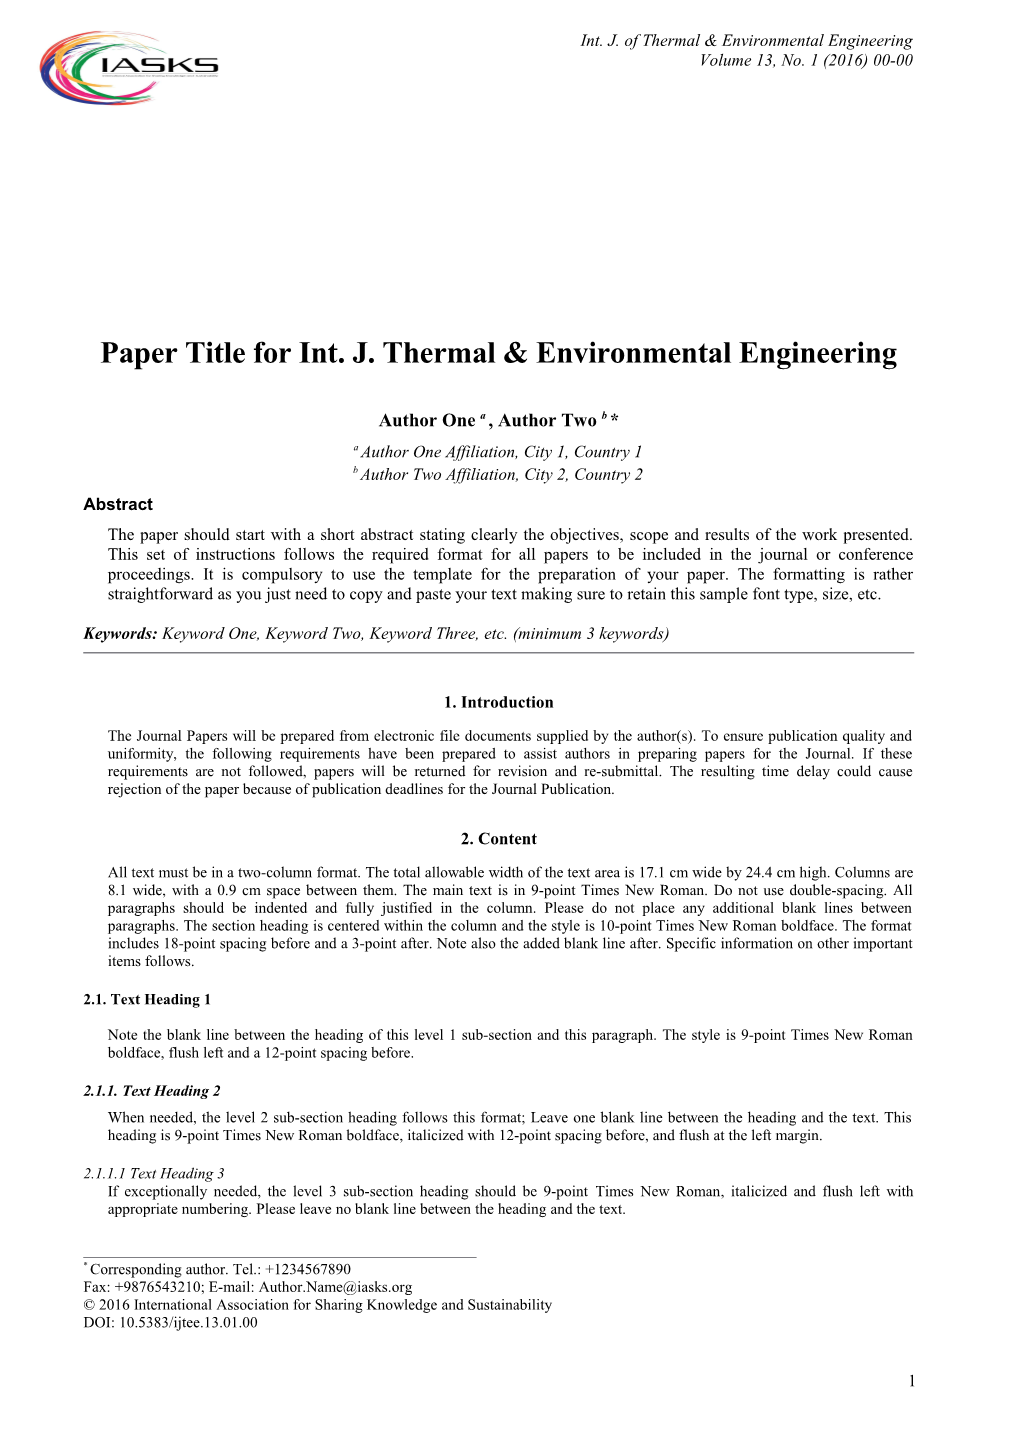 Author Et Al. / Int. J. of Thermal & Environmental Engineering, 13 (2016) 00-00